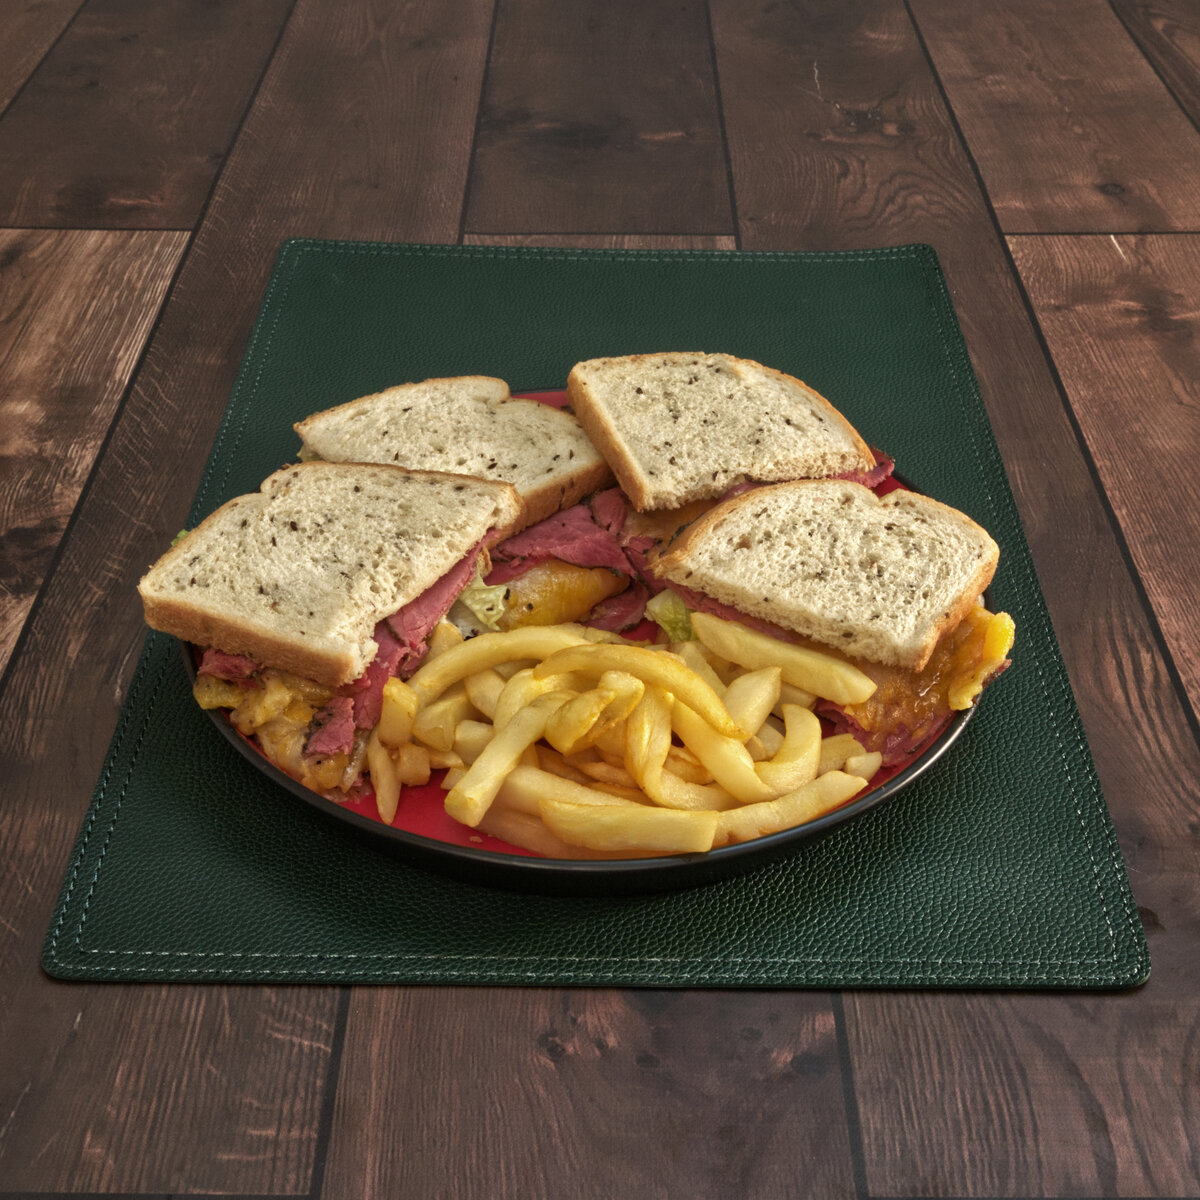 Hot Pastrami & Cheese on Dill Rye Sandwiches with French Fries